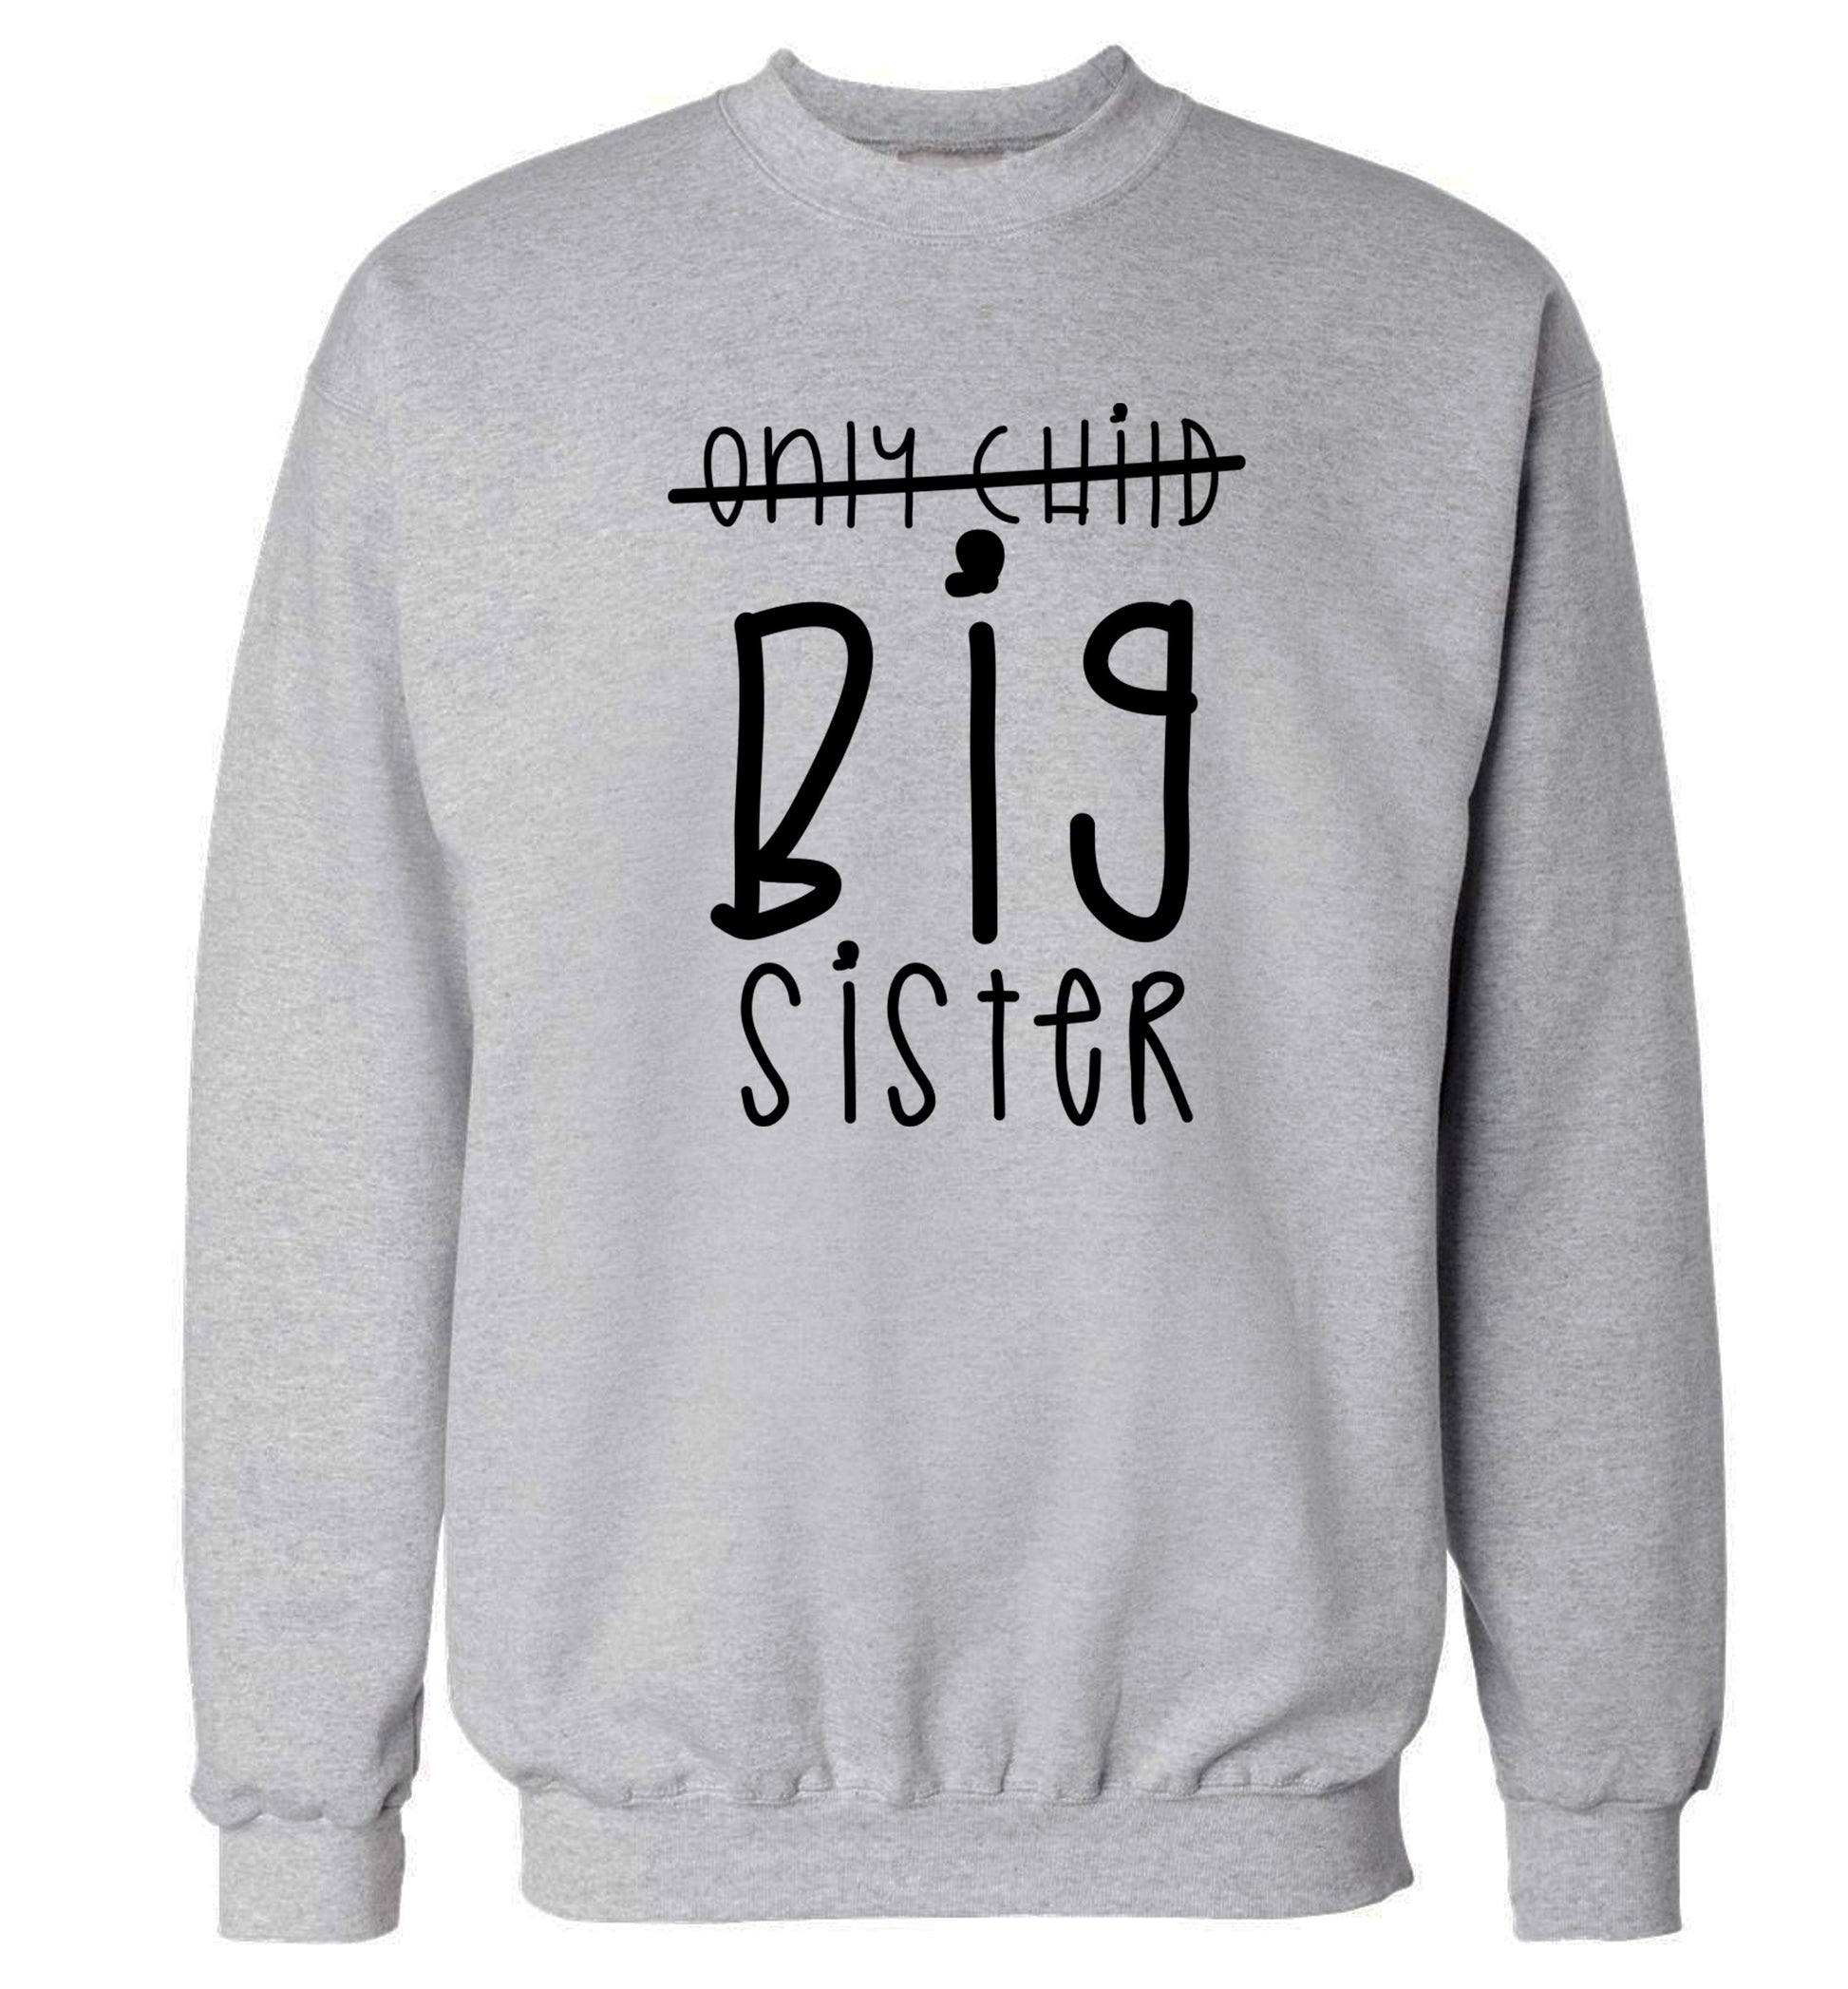 Only child big sister Adult's unisex grey Sweater 2XL